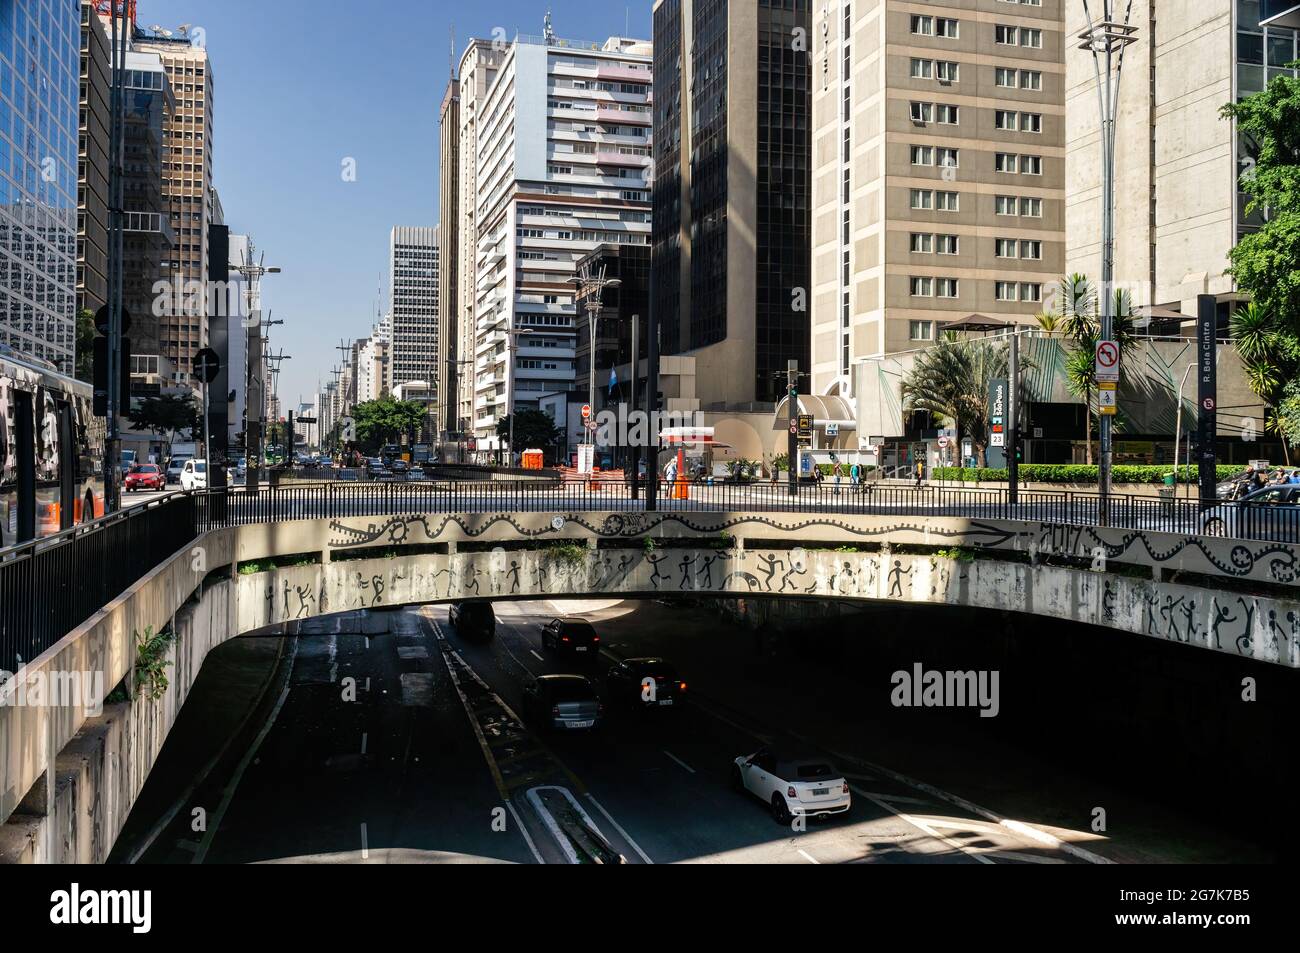 Partial view of Jose Roberto Fanganiello Melhem tunnel, a short under level road located at the northwest end of Paulista Avenue. Stock Photo